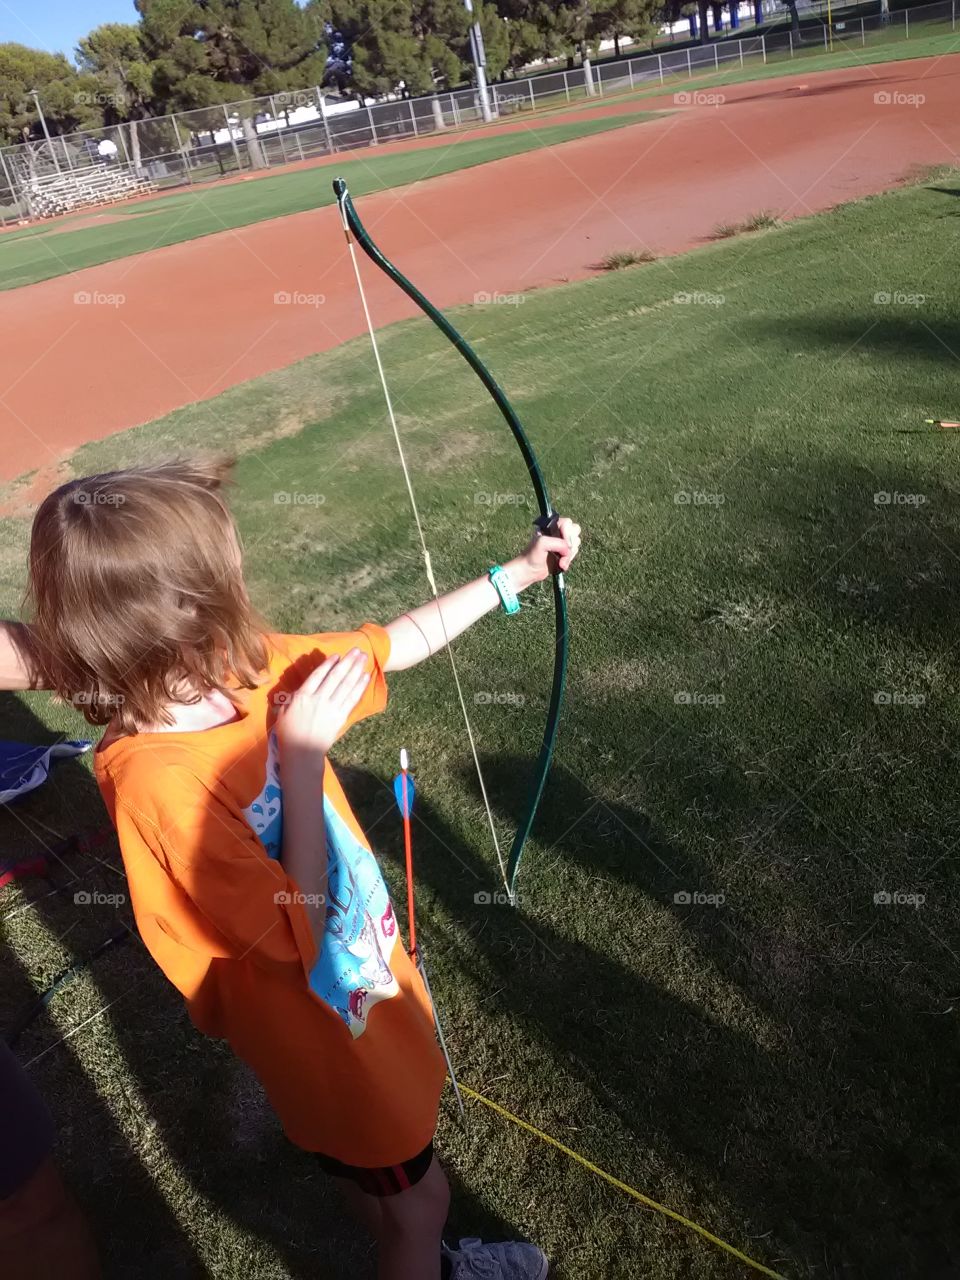 my daughter at day camp for Cub scouts yeah. she learn how to shoot safely with the bow and arrow.